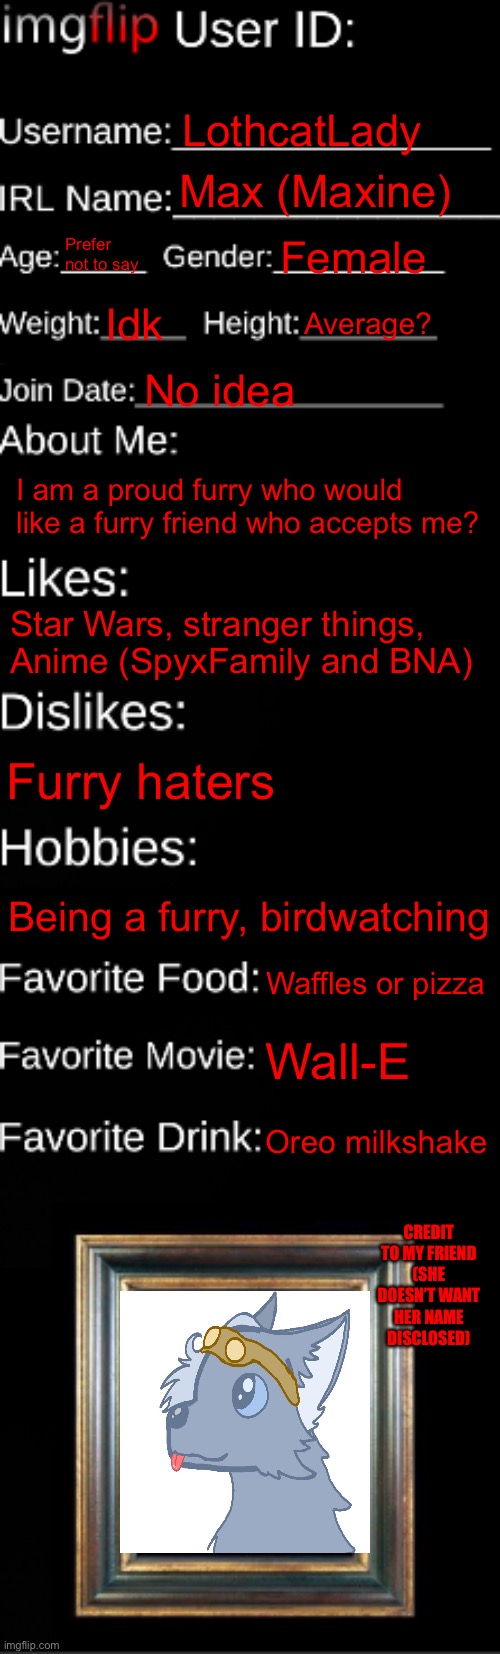 All about me for anyone who wants to be friends? | LothcatLady; Max (Maxine); Prefer not to say; Female; Idk; Average? No idea; I am a proud furry who would like a furry friend who accepts me? Star Wars, stranger things,
Anime (SpyxFamily and BNA); Furry haters; Being a furry, birdwatching; Waffles or pizza; Wall-E; Oreo milkshake; CREDIT TO MY FRIEND (SHE DOESN’T WANT HER NAME DISCLOSED) | image tagged in imgflip id card | made w/ Imgflip meme maker